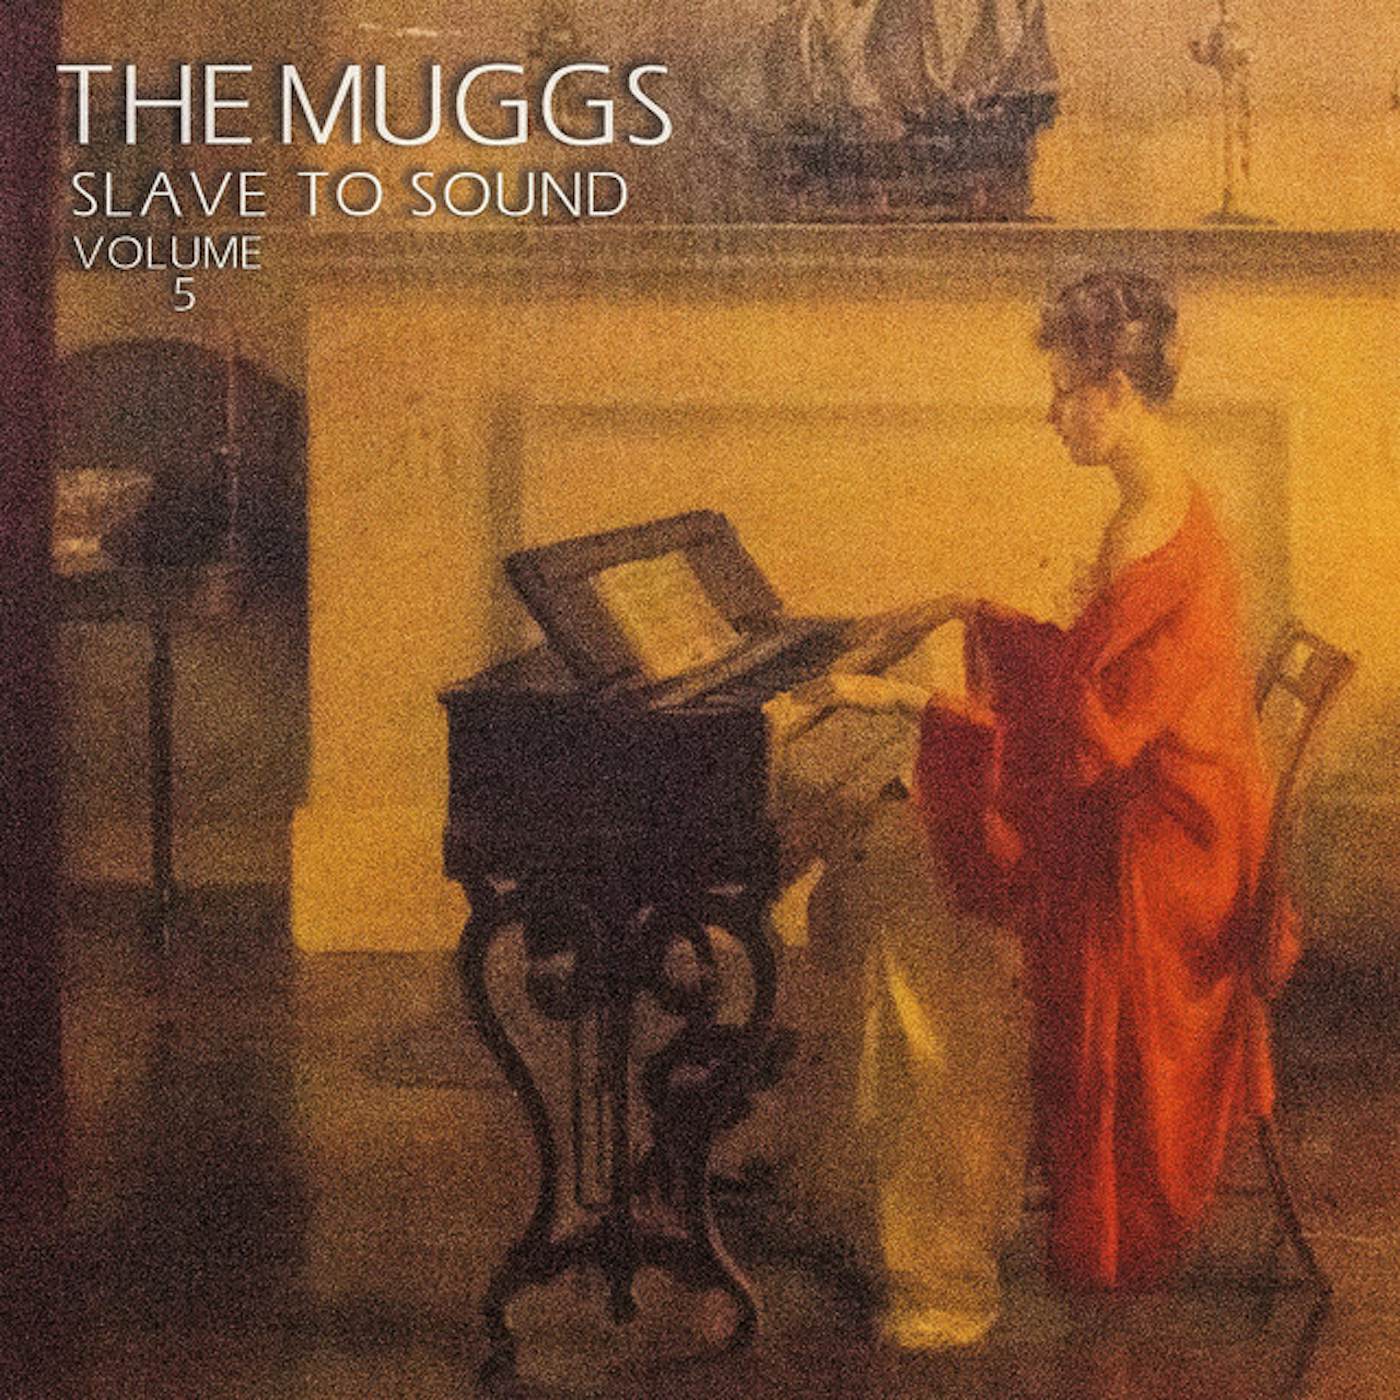 The Muggs SLAVE TO SOUND 5 CD